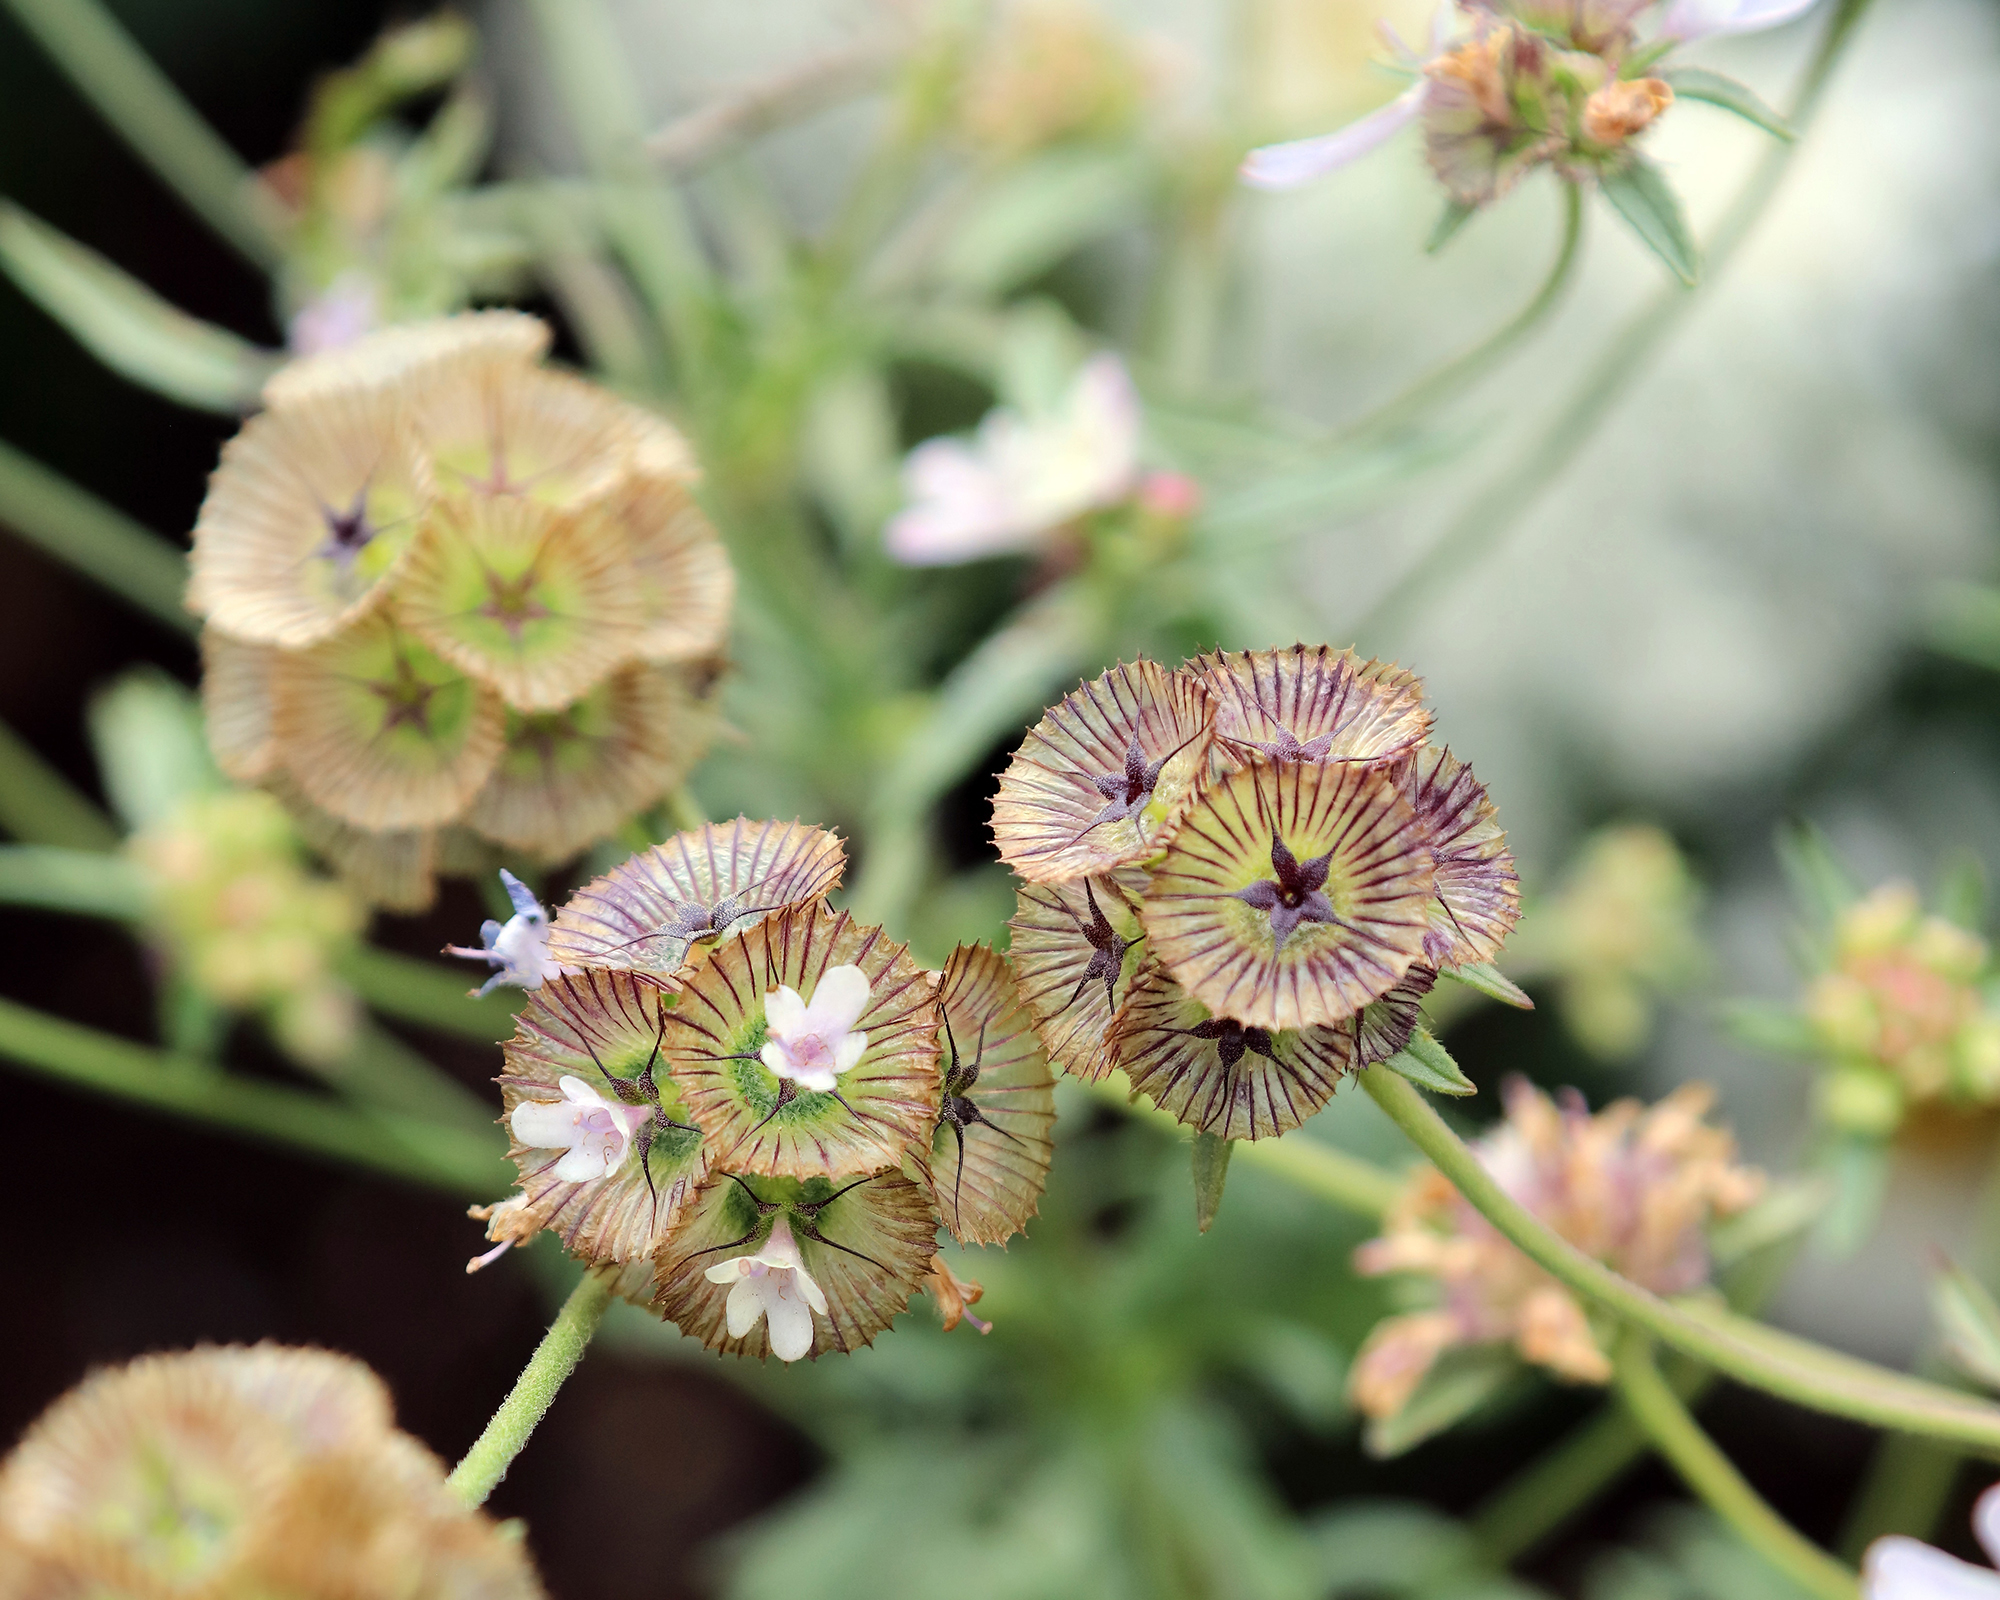 Ping Pong Scabiosa stellata seed heads